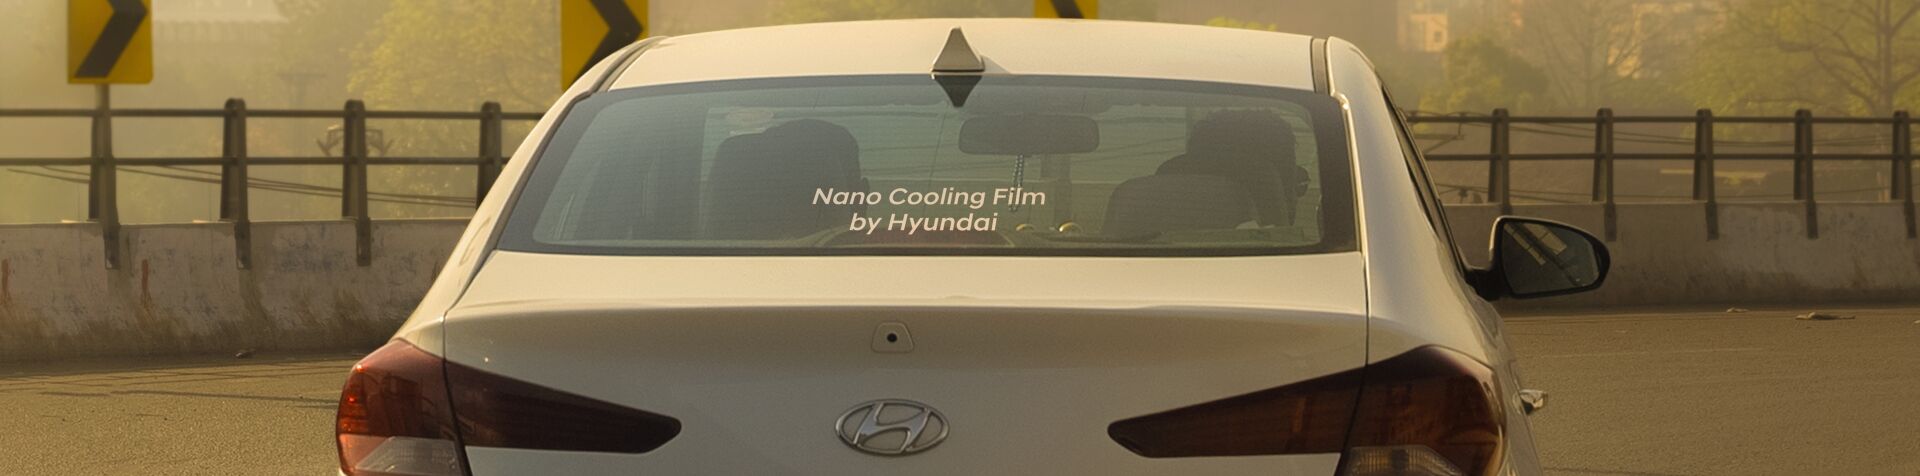 The rear view of an ELANTRA with the words “Nano Cooling Film by Hyundai” written across its back windshield